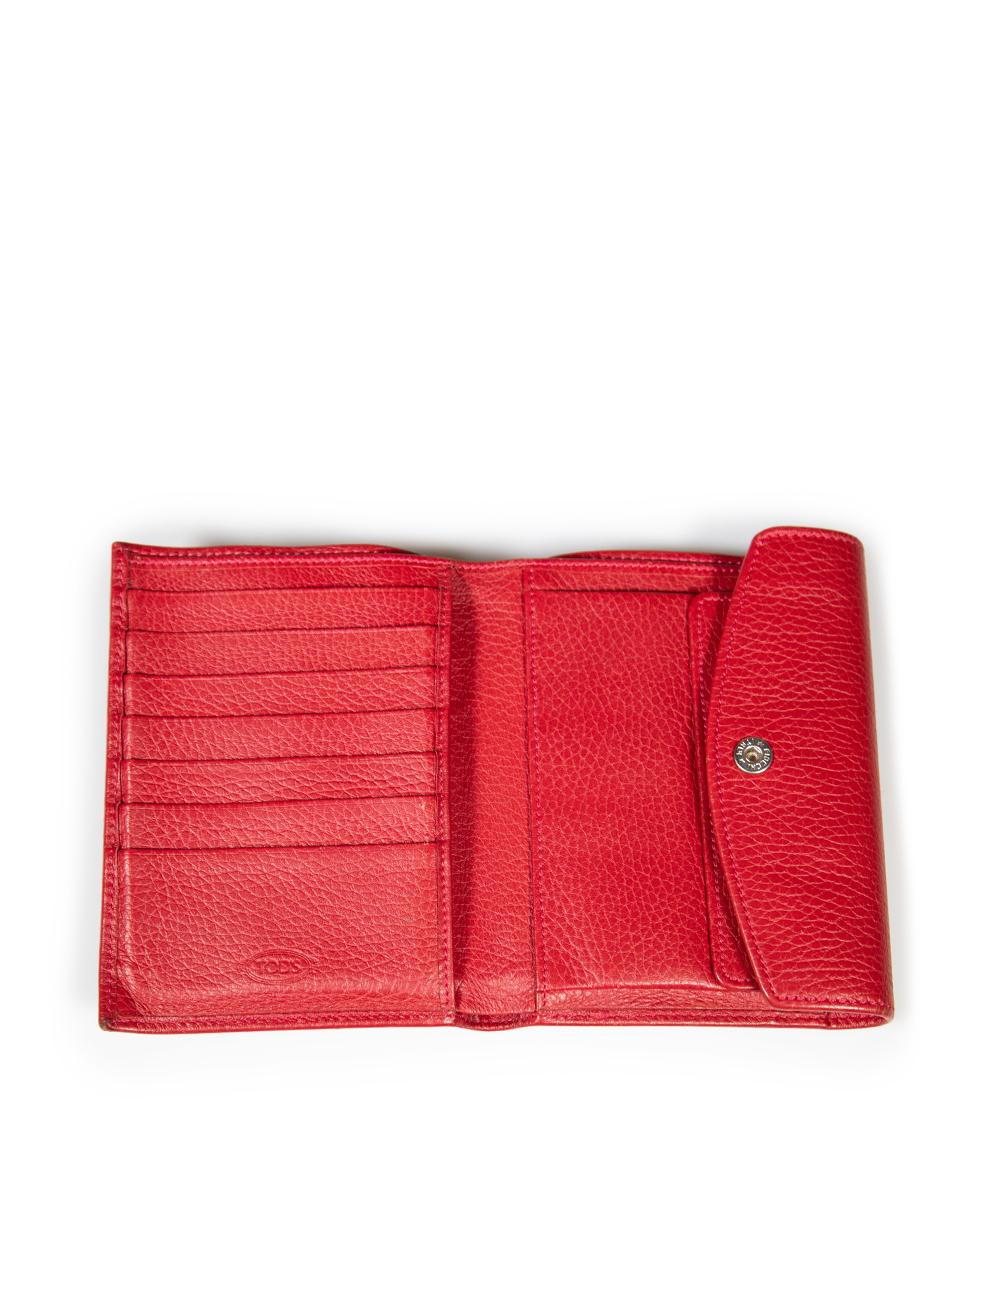 Tod's Red Leather Wallet For Sale 1